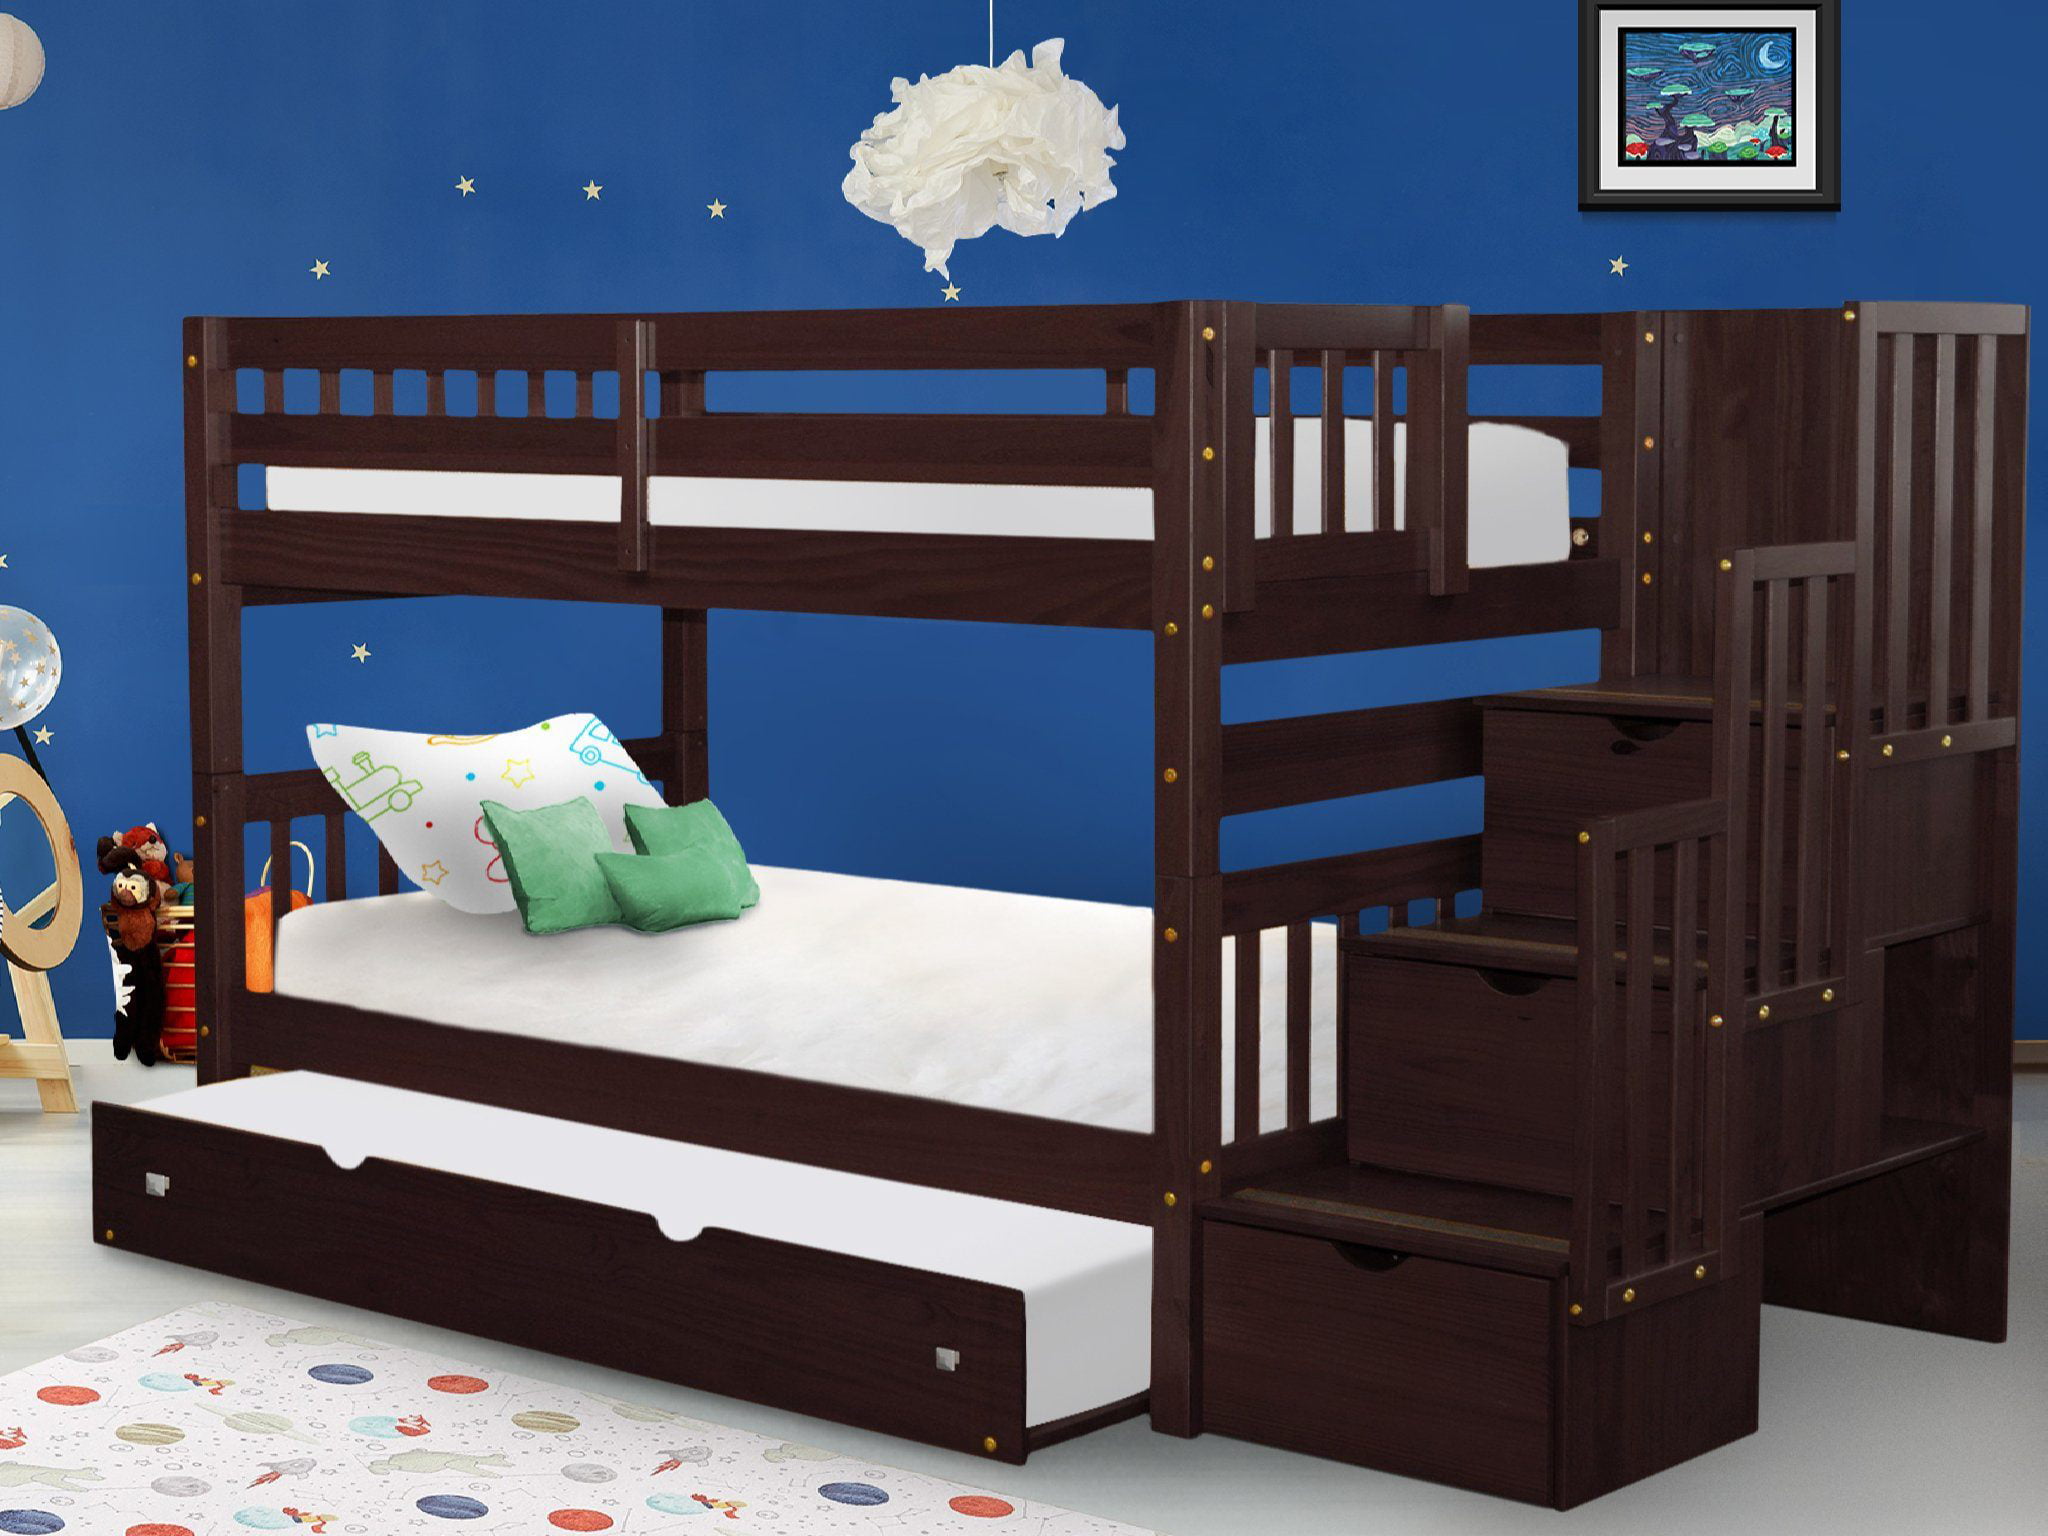 Bedz King Stairway Bunk Beds Twin Over, Bunk Beds That Convert To Twin